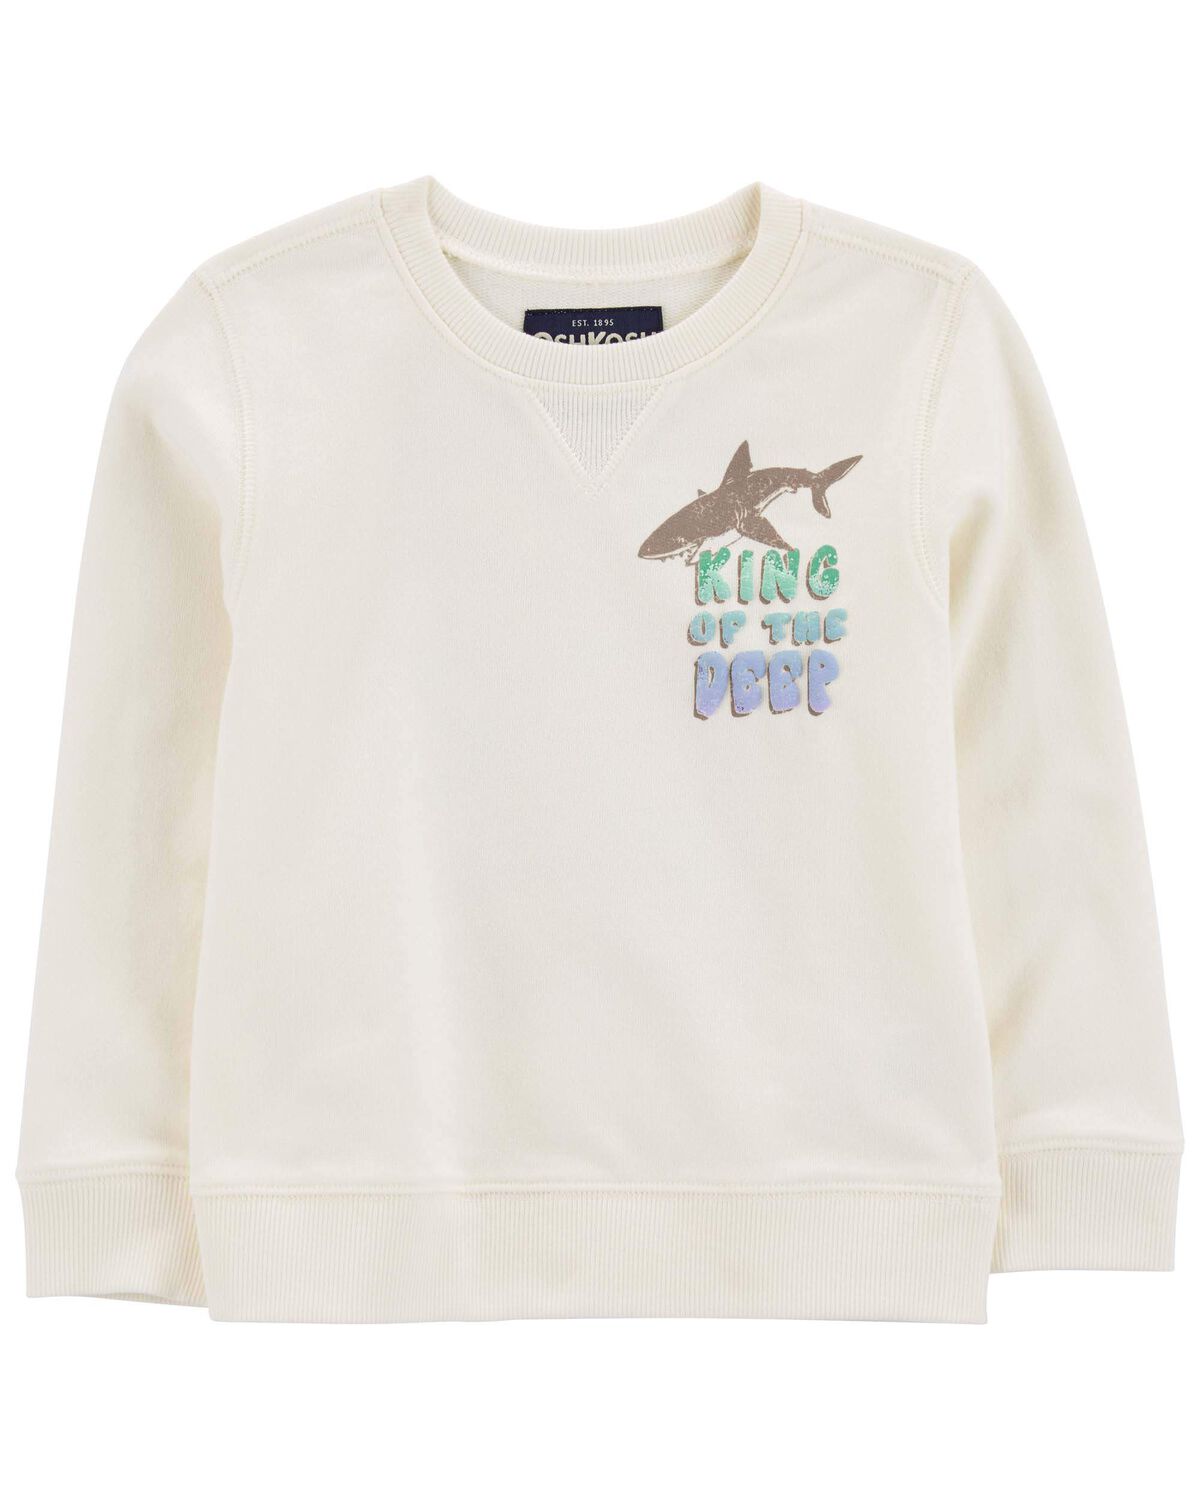 Toddler King of the Deep Pullover